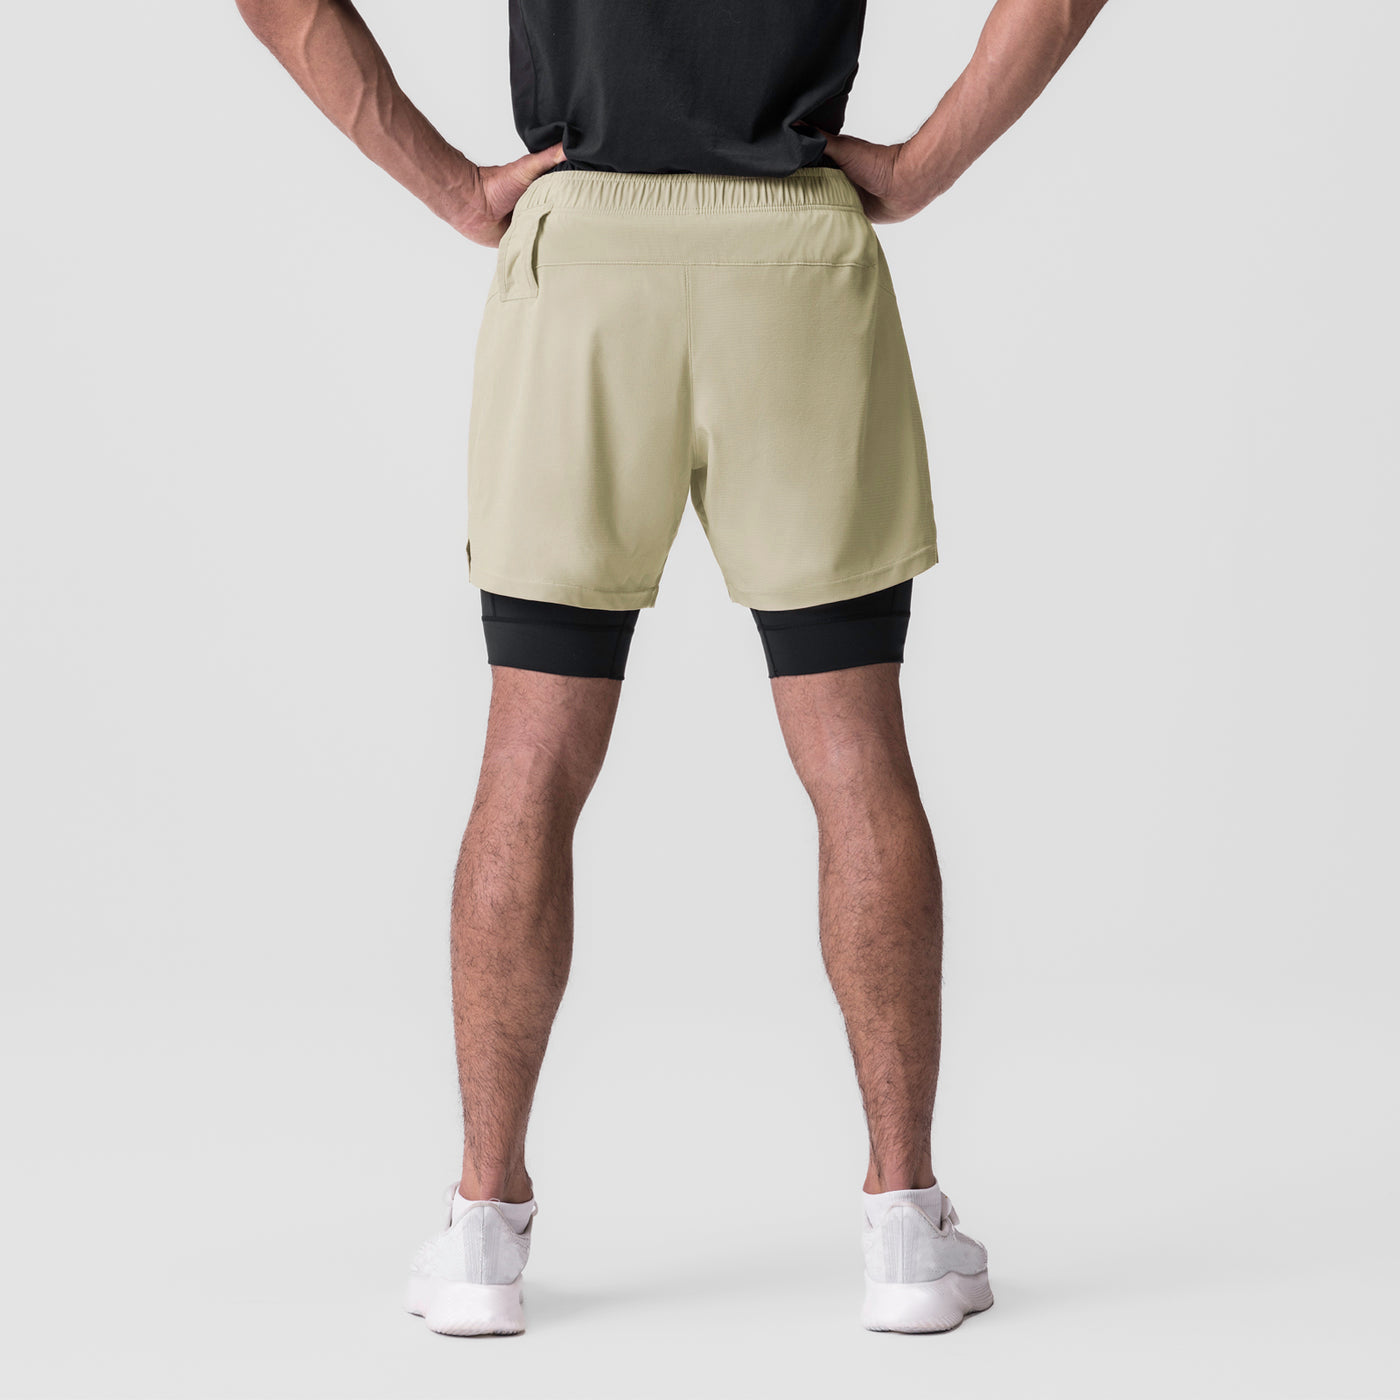 Men’s 2 in 1 Quick Dry Workout Shorts - Olive Green